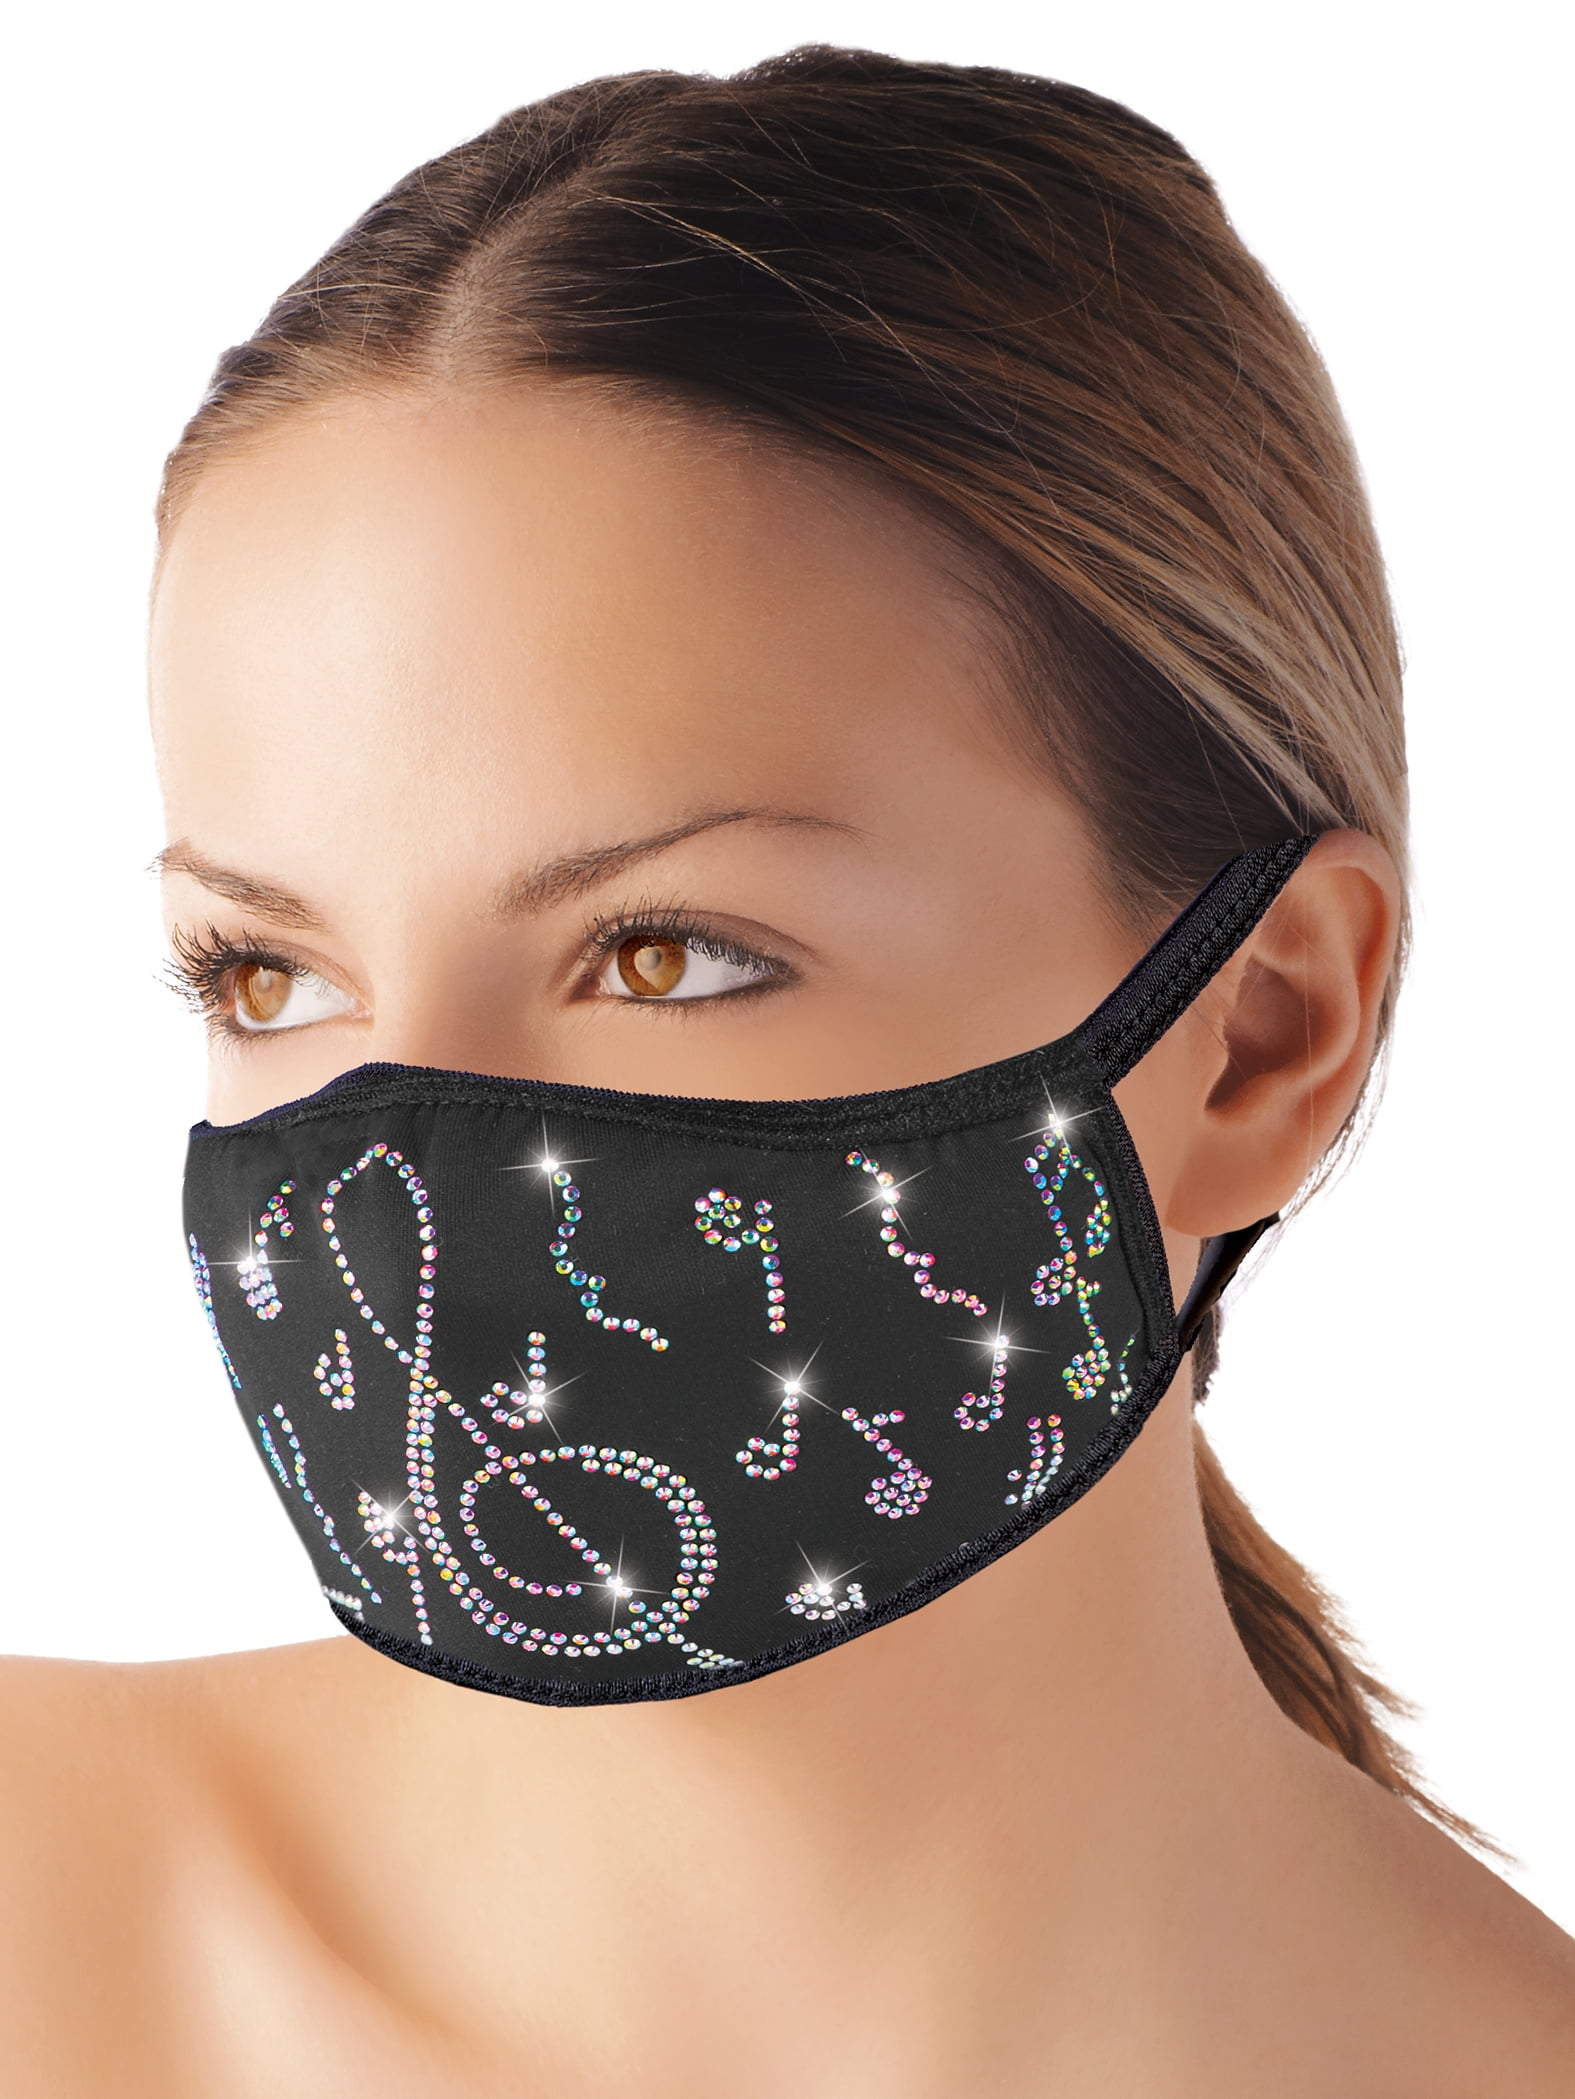  Sparkle Crystal Mouth Shield Black Cotton Dust-proof Mouth Coving Washable Patt 